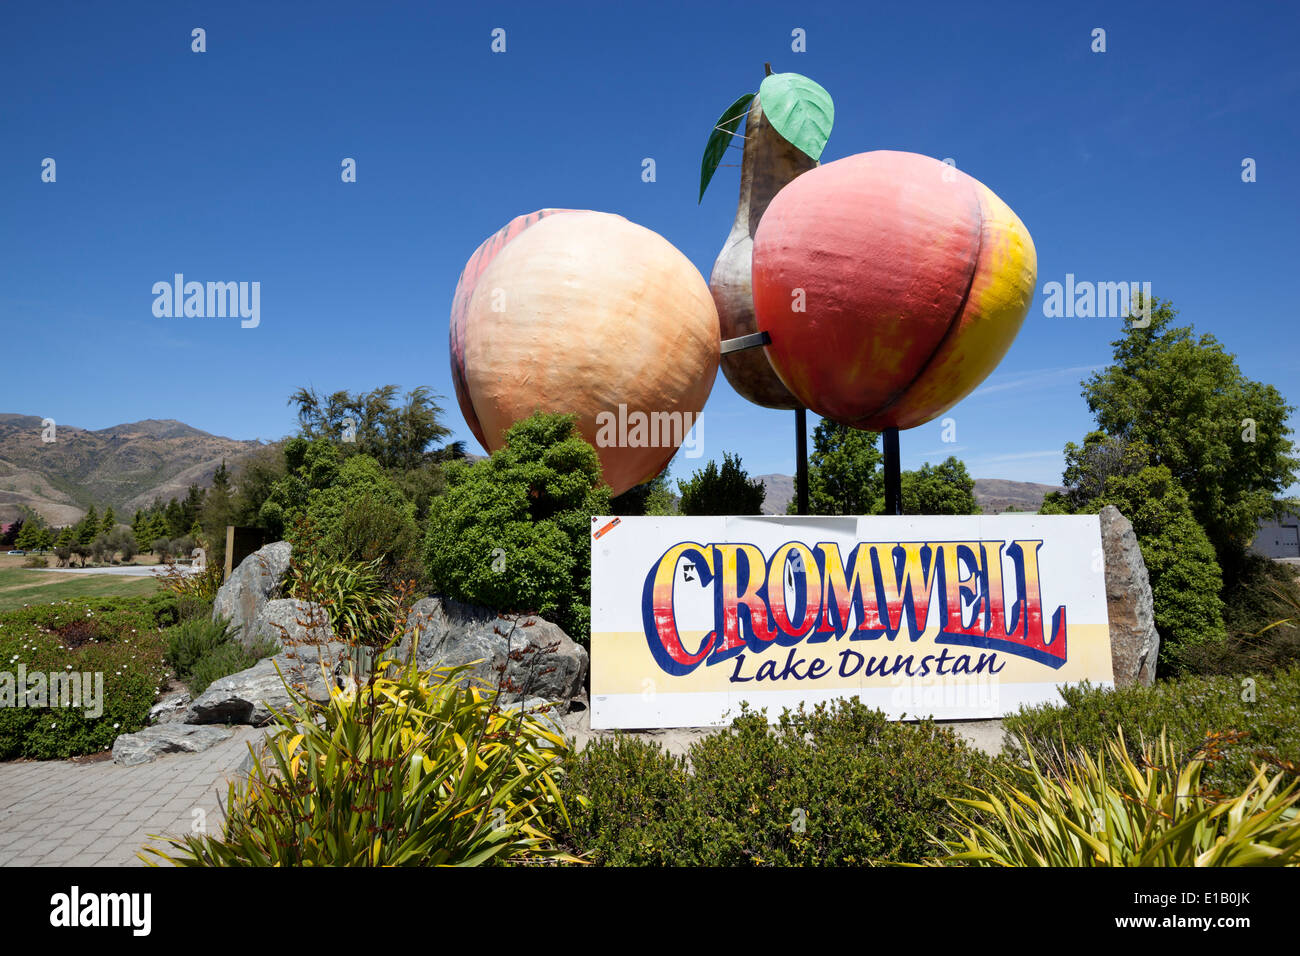 Big fruit sculpture, Cromwell, Otago region, South Island, New Zealand, South Pacific Stock Photo